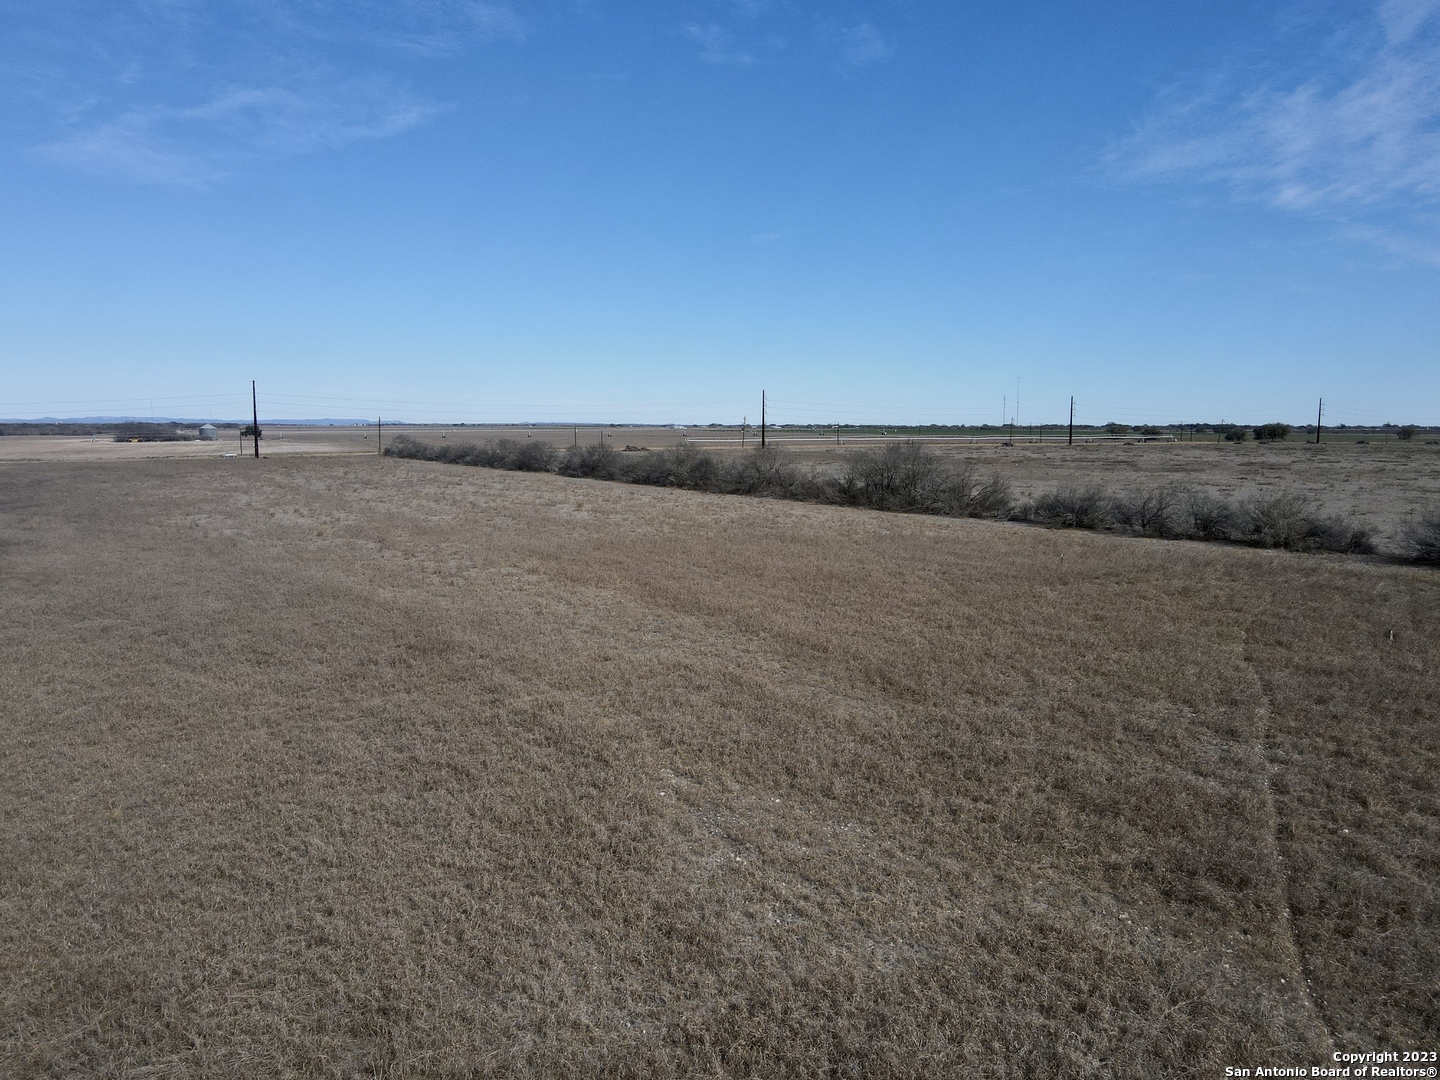 TBD TRACT I COUNTY ROAD 512, Dhanis, TX 